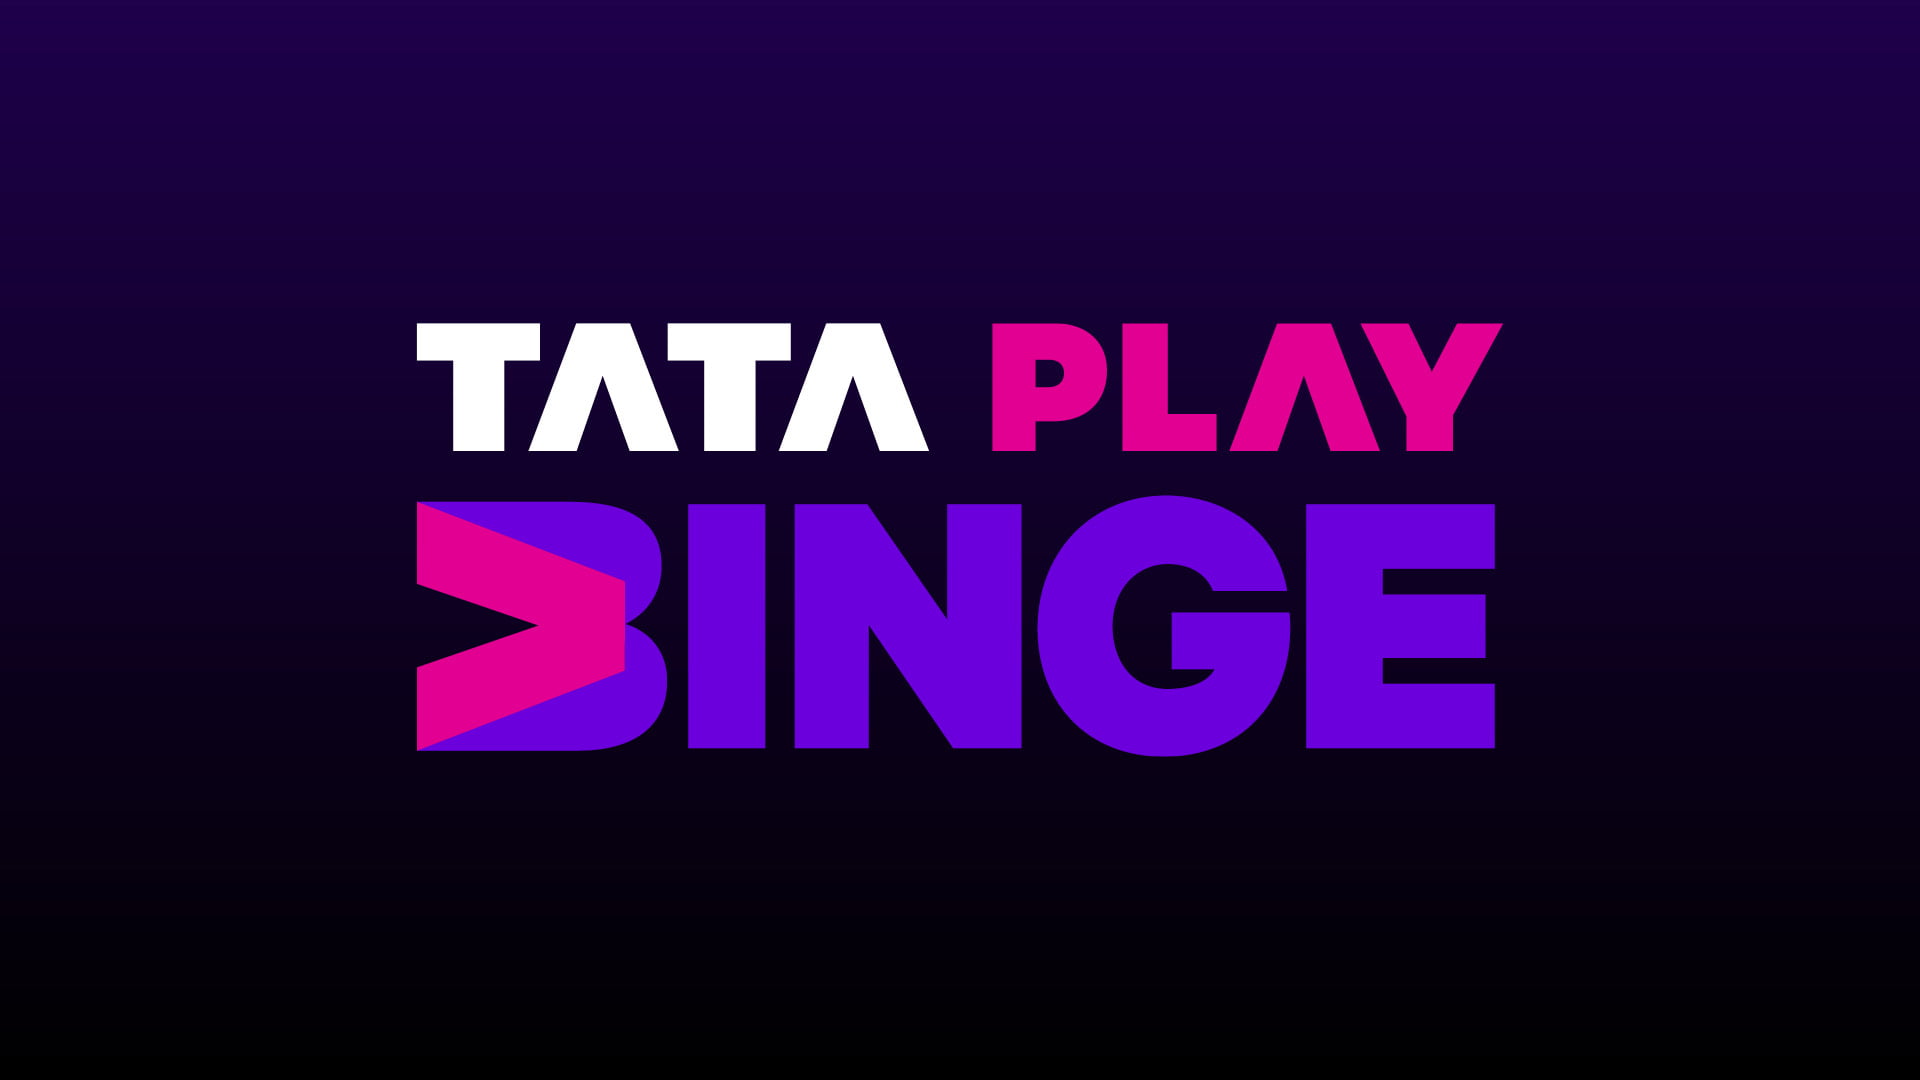 Tata Play Binge subscription now available to all smartphone users